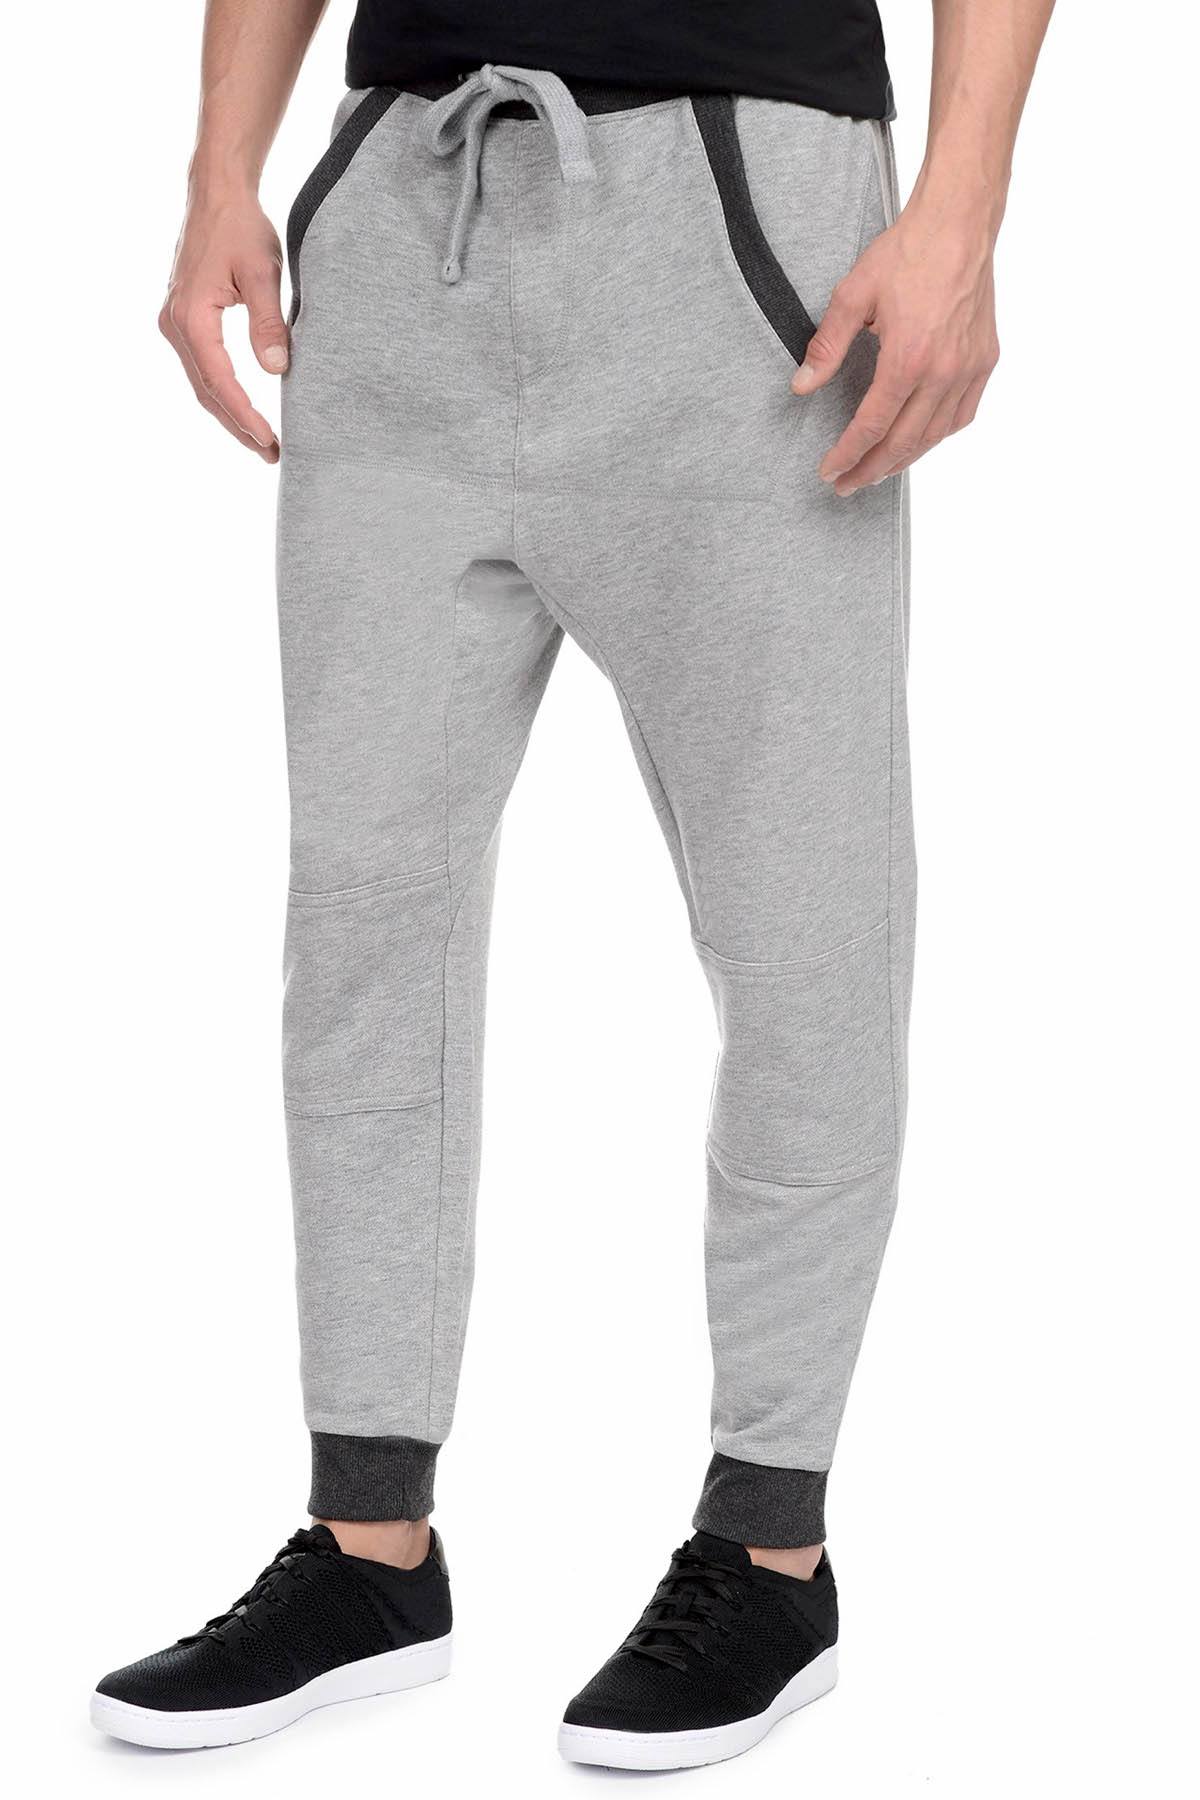 2(X)IST Light-Heather-Grey French Terry Drop Inseam Jogger Pant